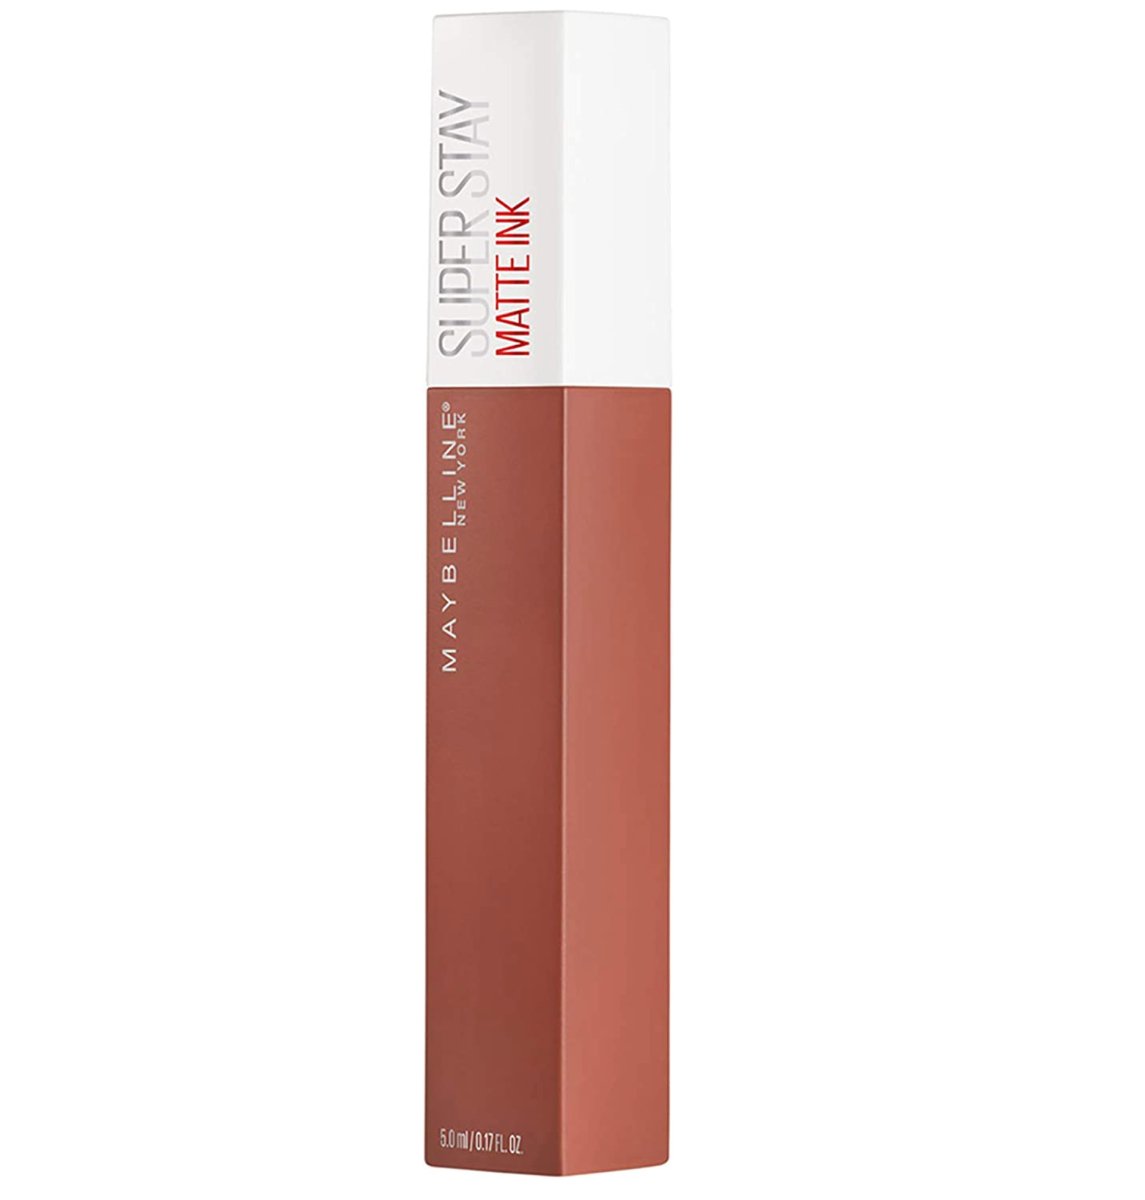 Image of Maybelline SuperStay Matte Ink Lipstick - 70 Amazonian